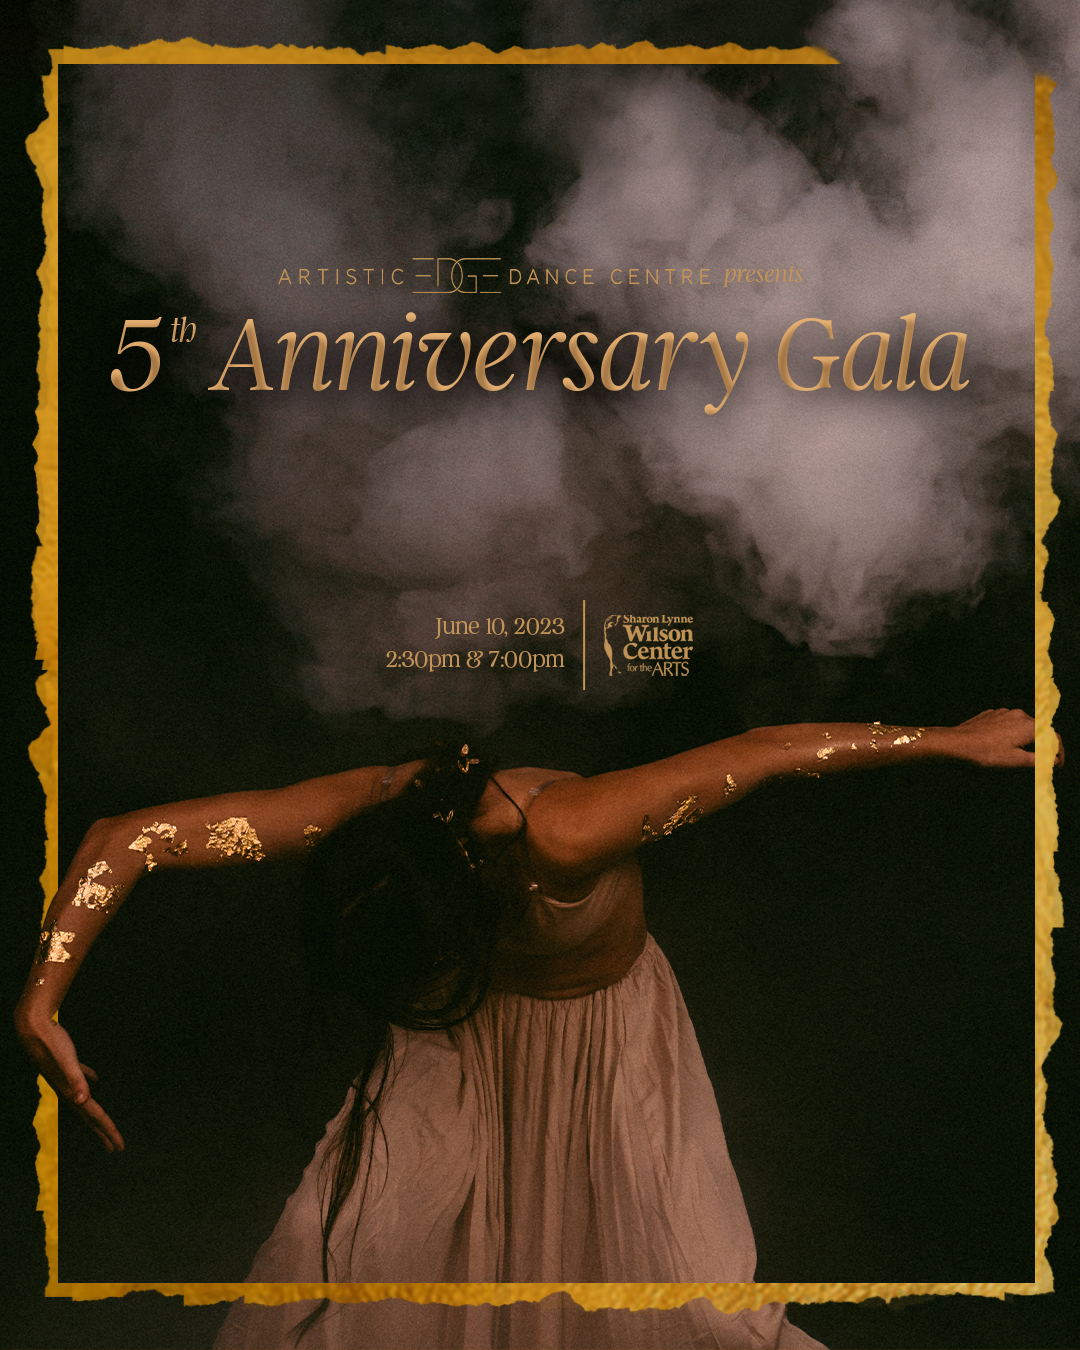 girl looking down wearing gold, black background with smoke, text reads '5th Anniversary Gala' for Artistic Edge Dance Centre